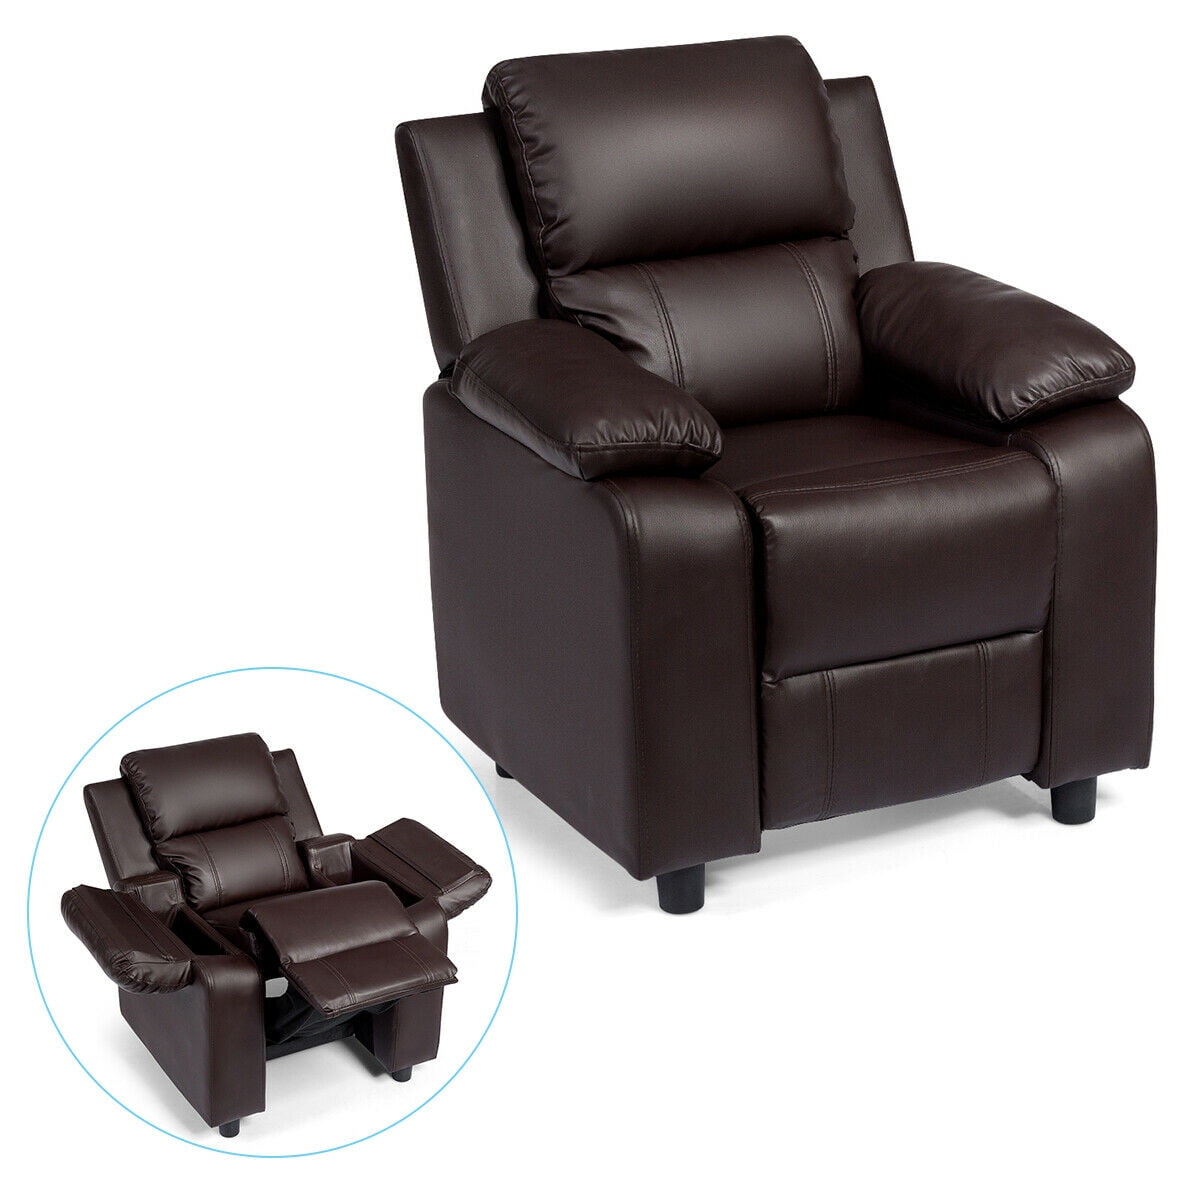 Gymax Deluxe Padded Kids Sofa Armchair, Baby Leather Recliner